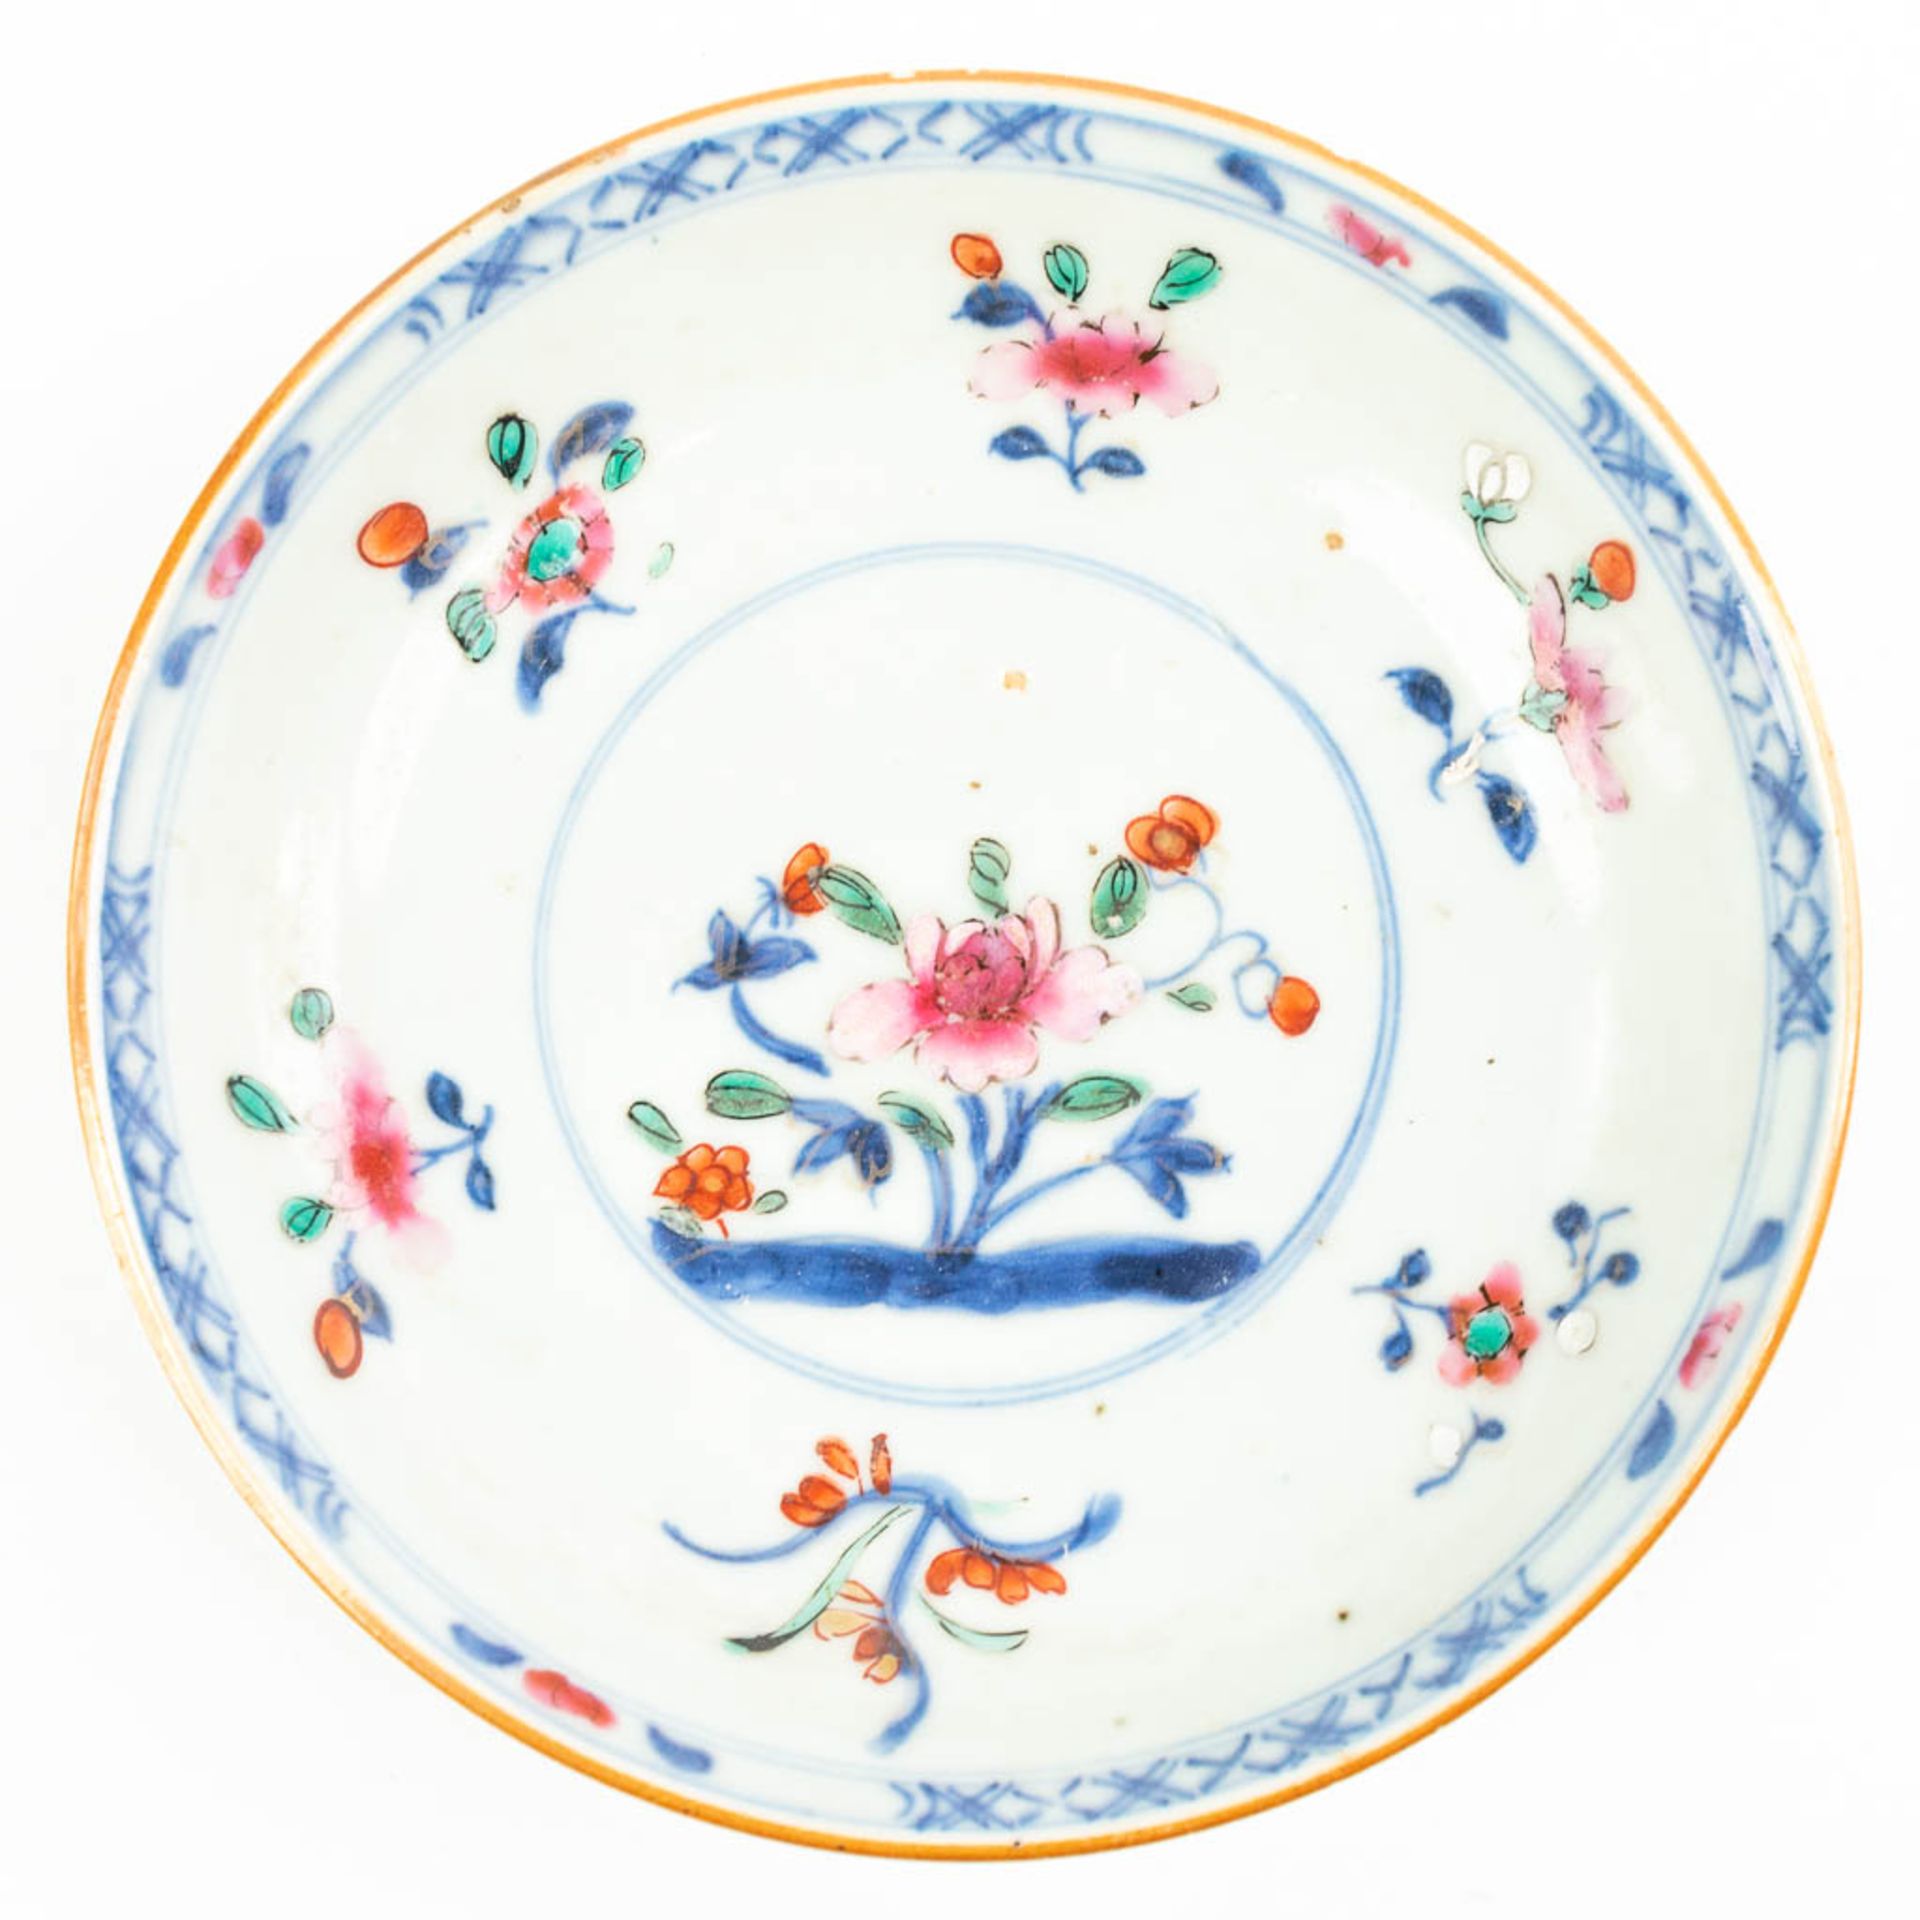 A collection of 5 plates made of Chinese porcelain with different patterns. - Image 12 of 15